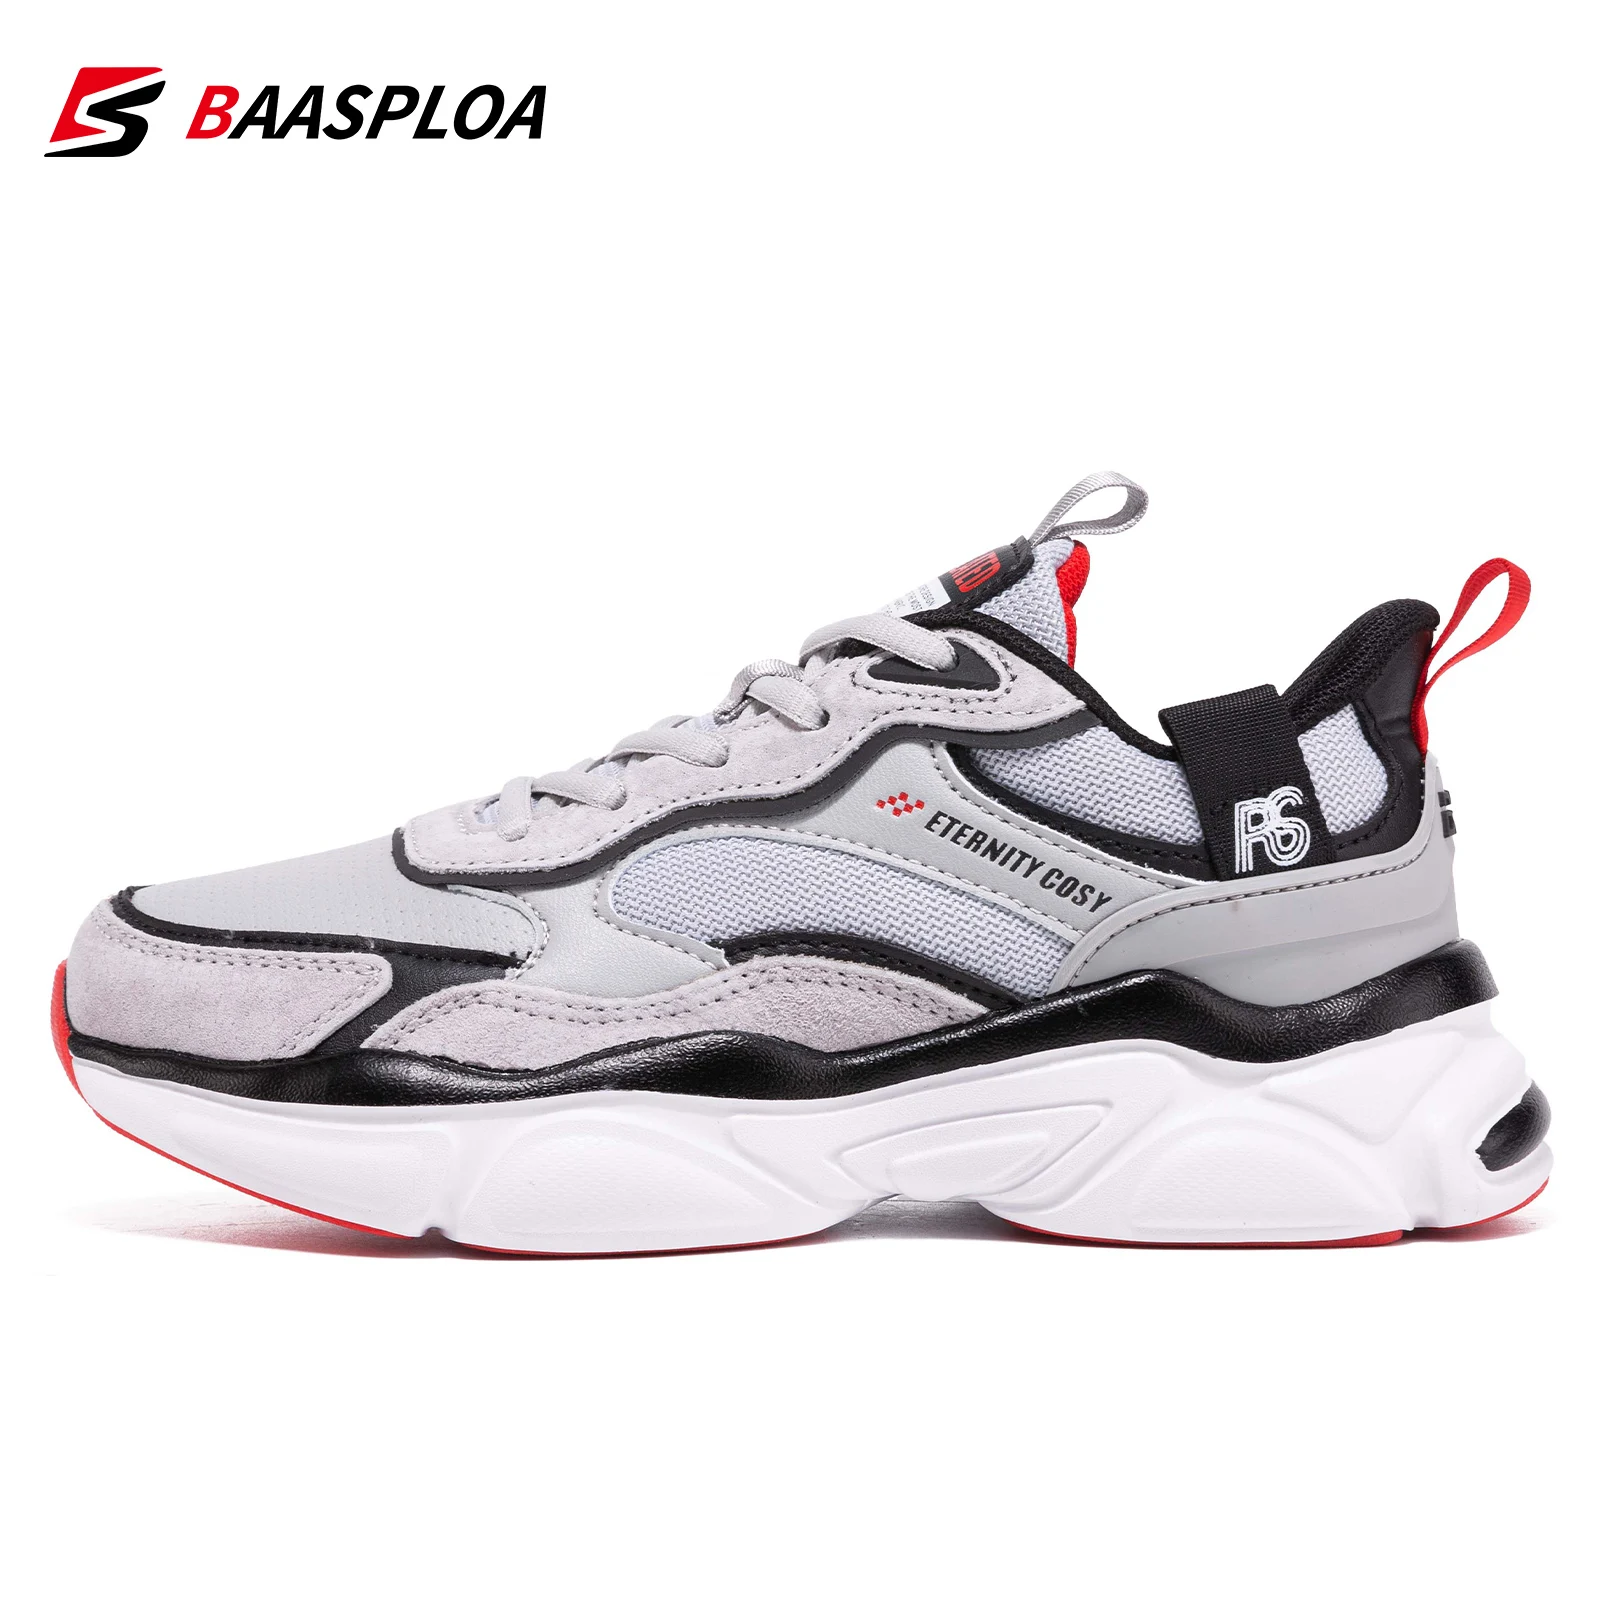 

Baasploa New Arrival Women's Casual Running Shoes Lightweight Sports Shoes Non-slip Leather Sneakers Comfort Walking Shoes